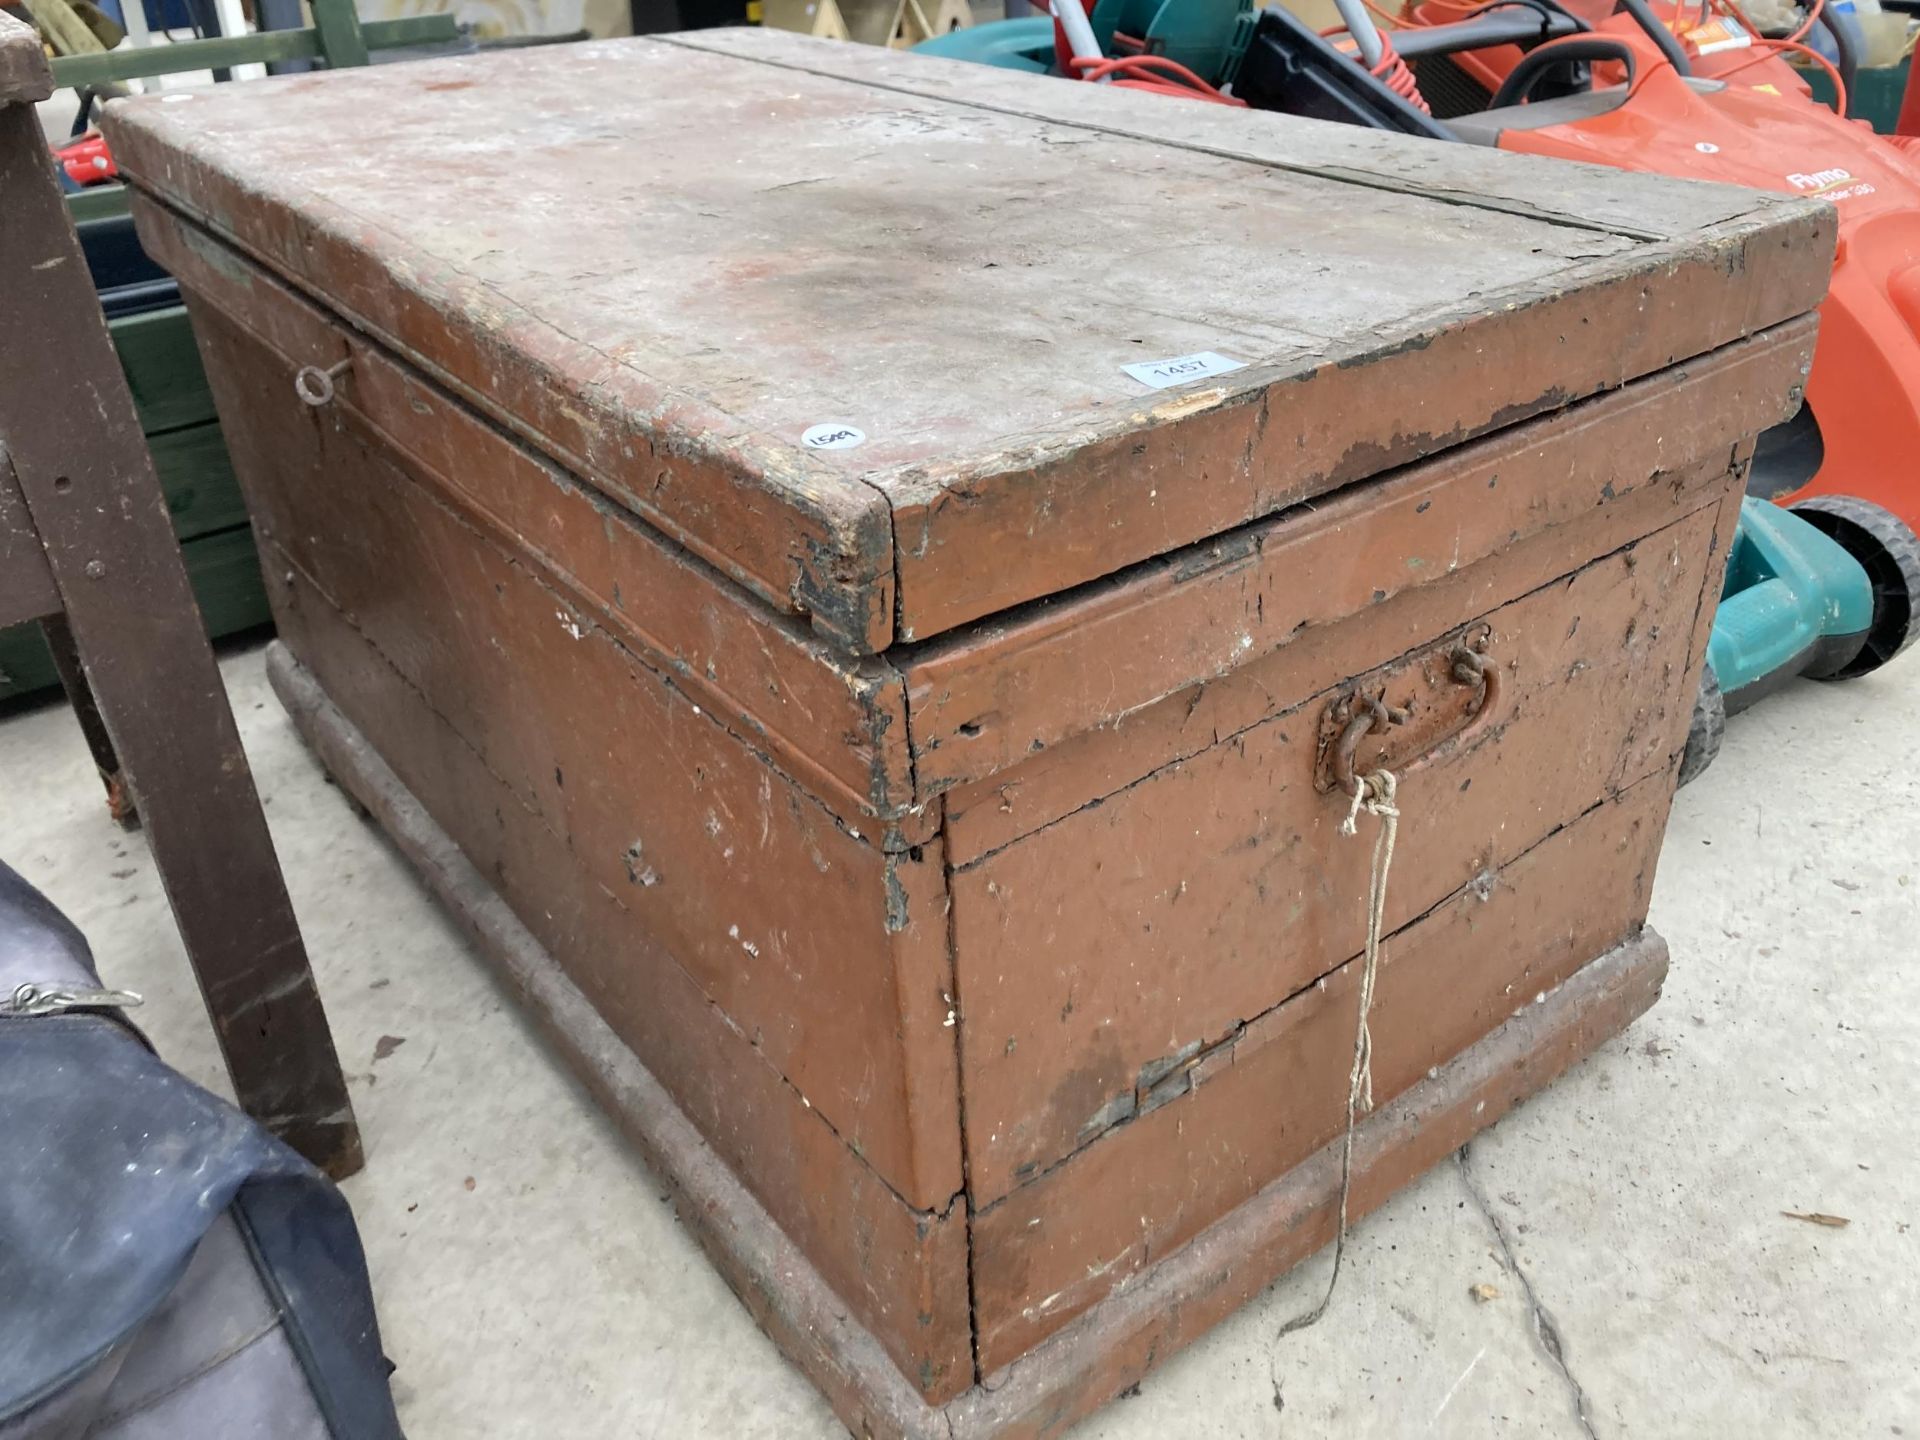 A LARGE VINTAGE WOODEN TOOL CHEST - Image 3 of 5